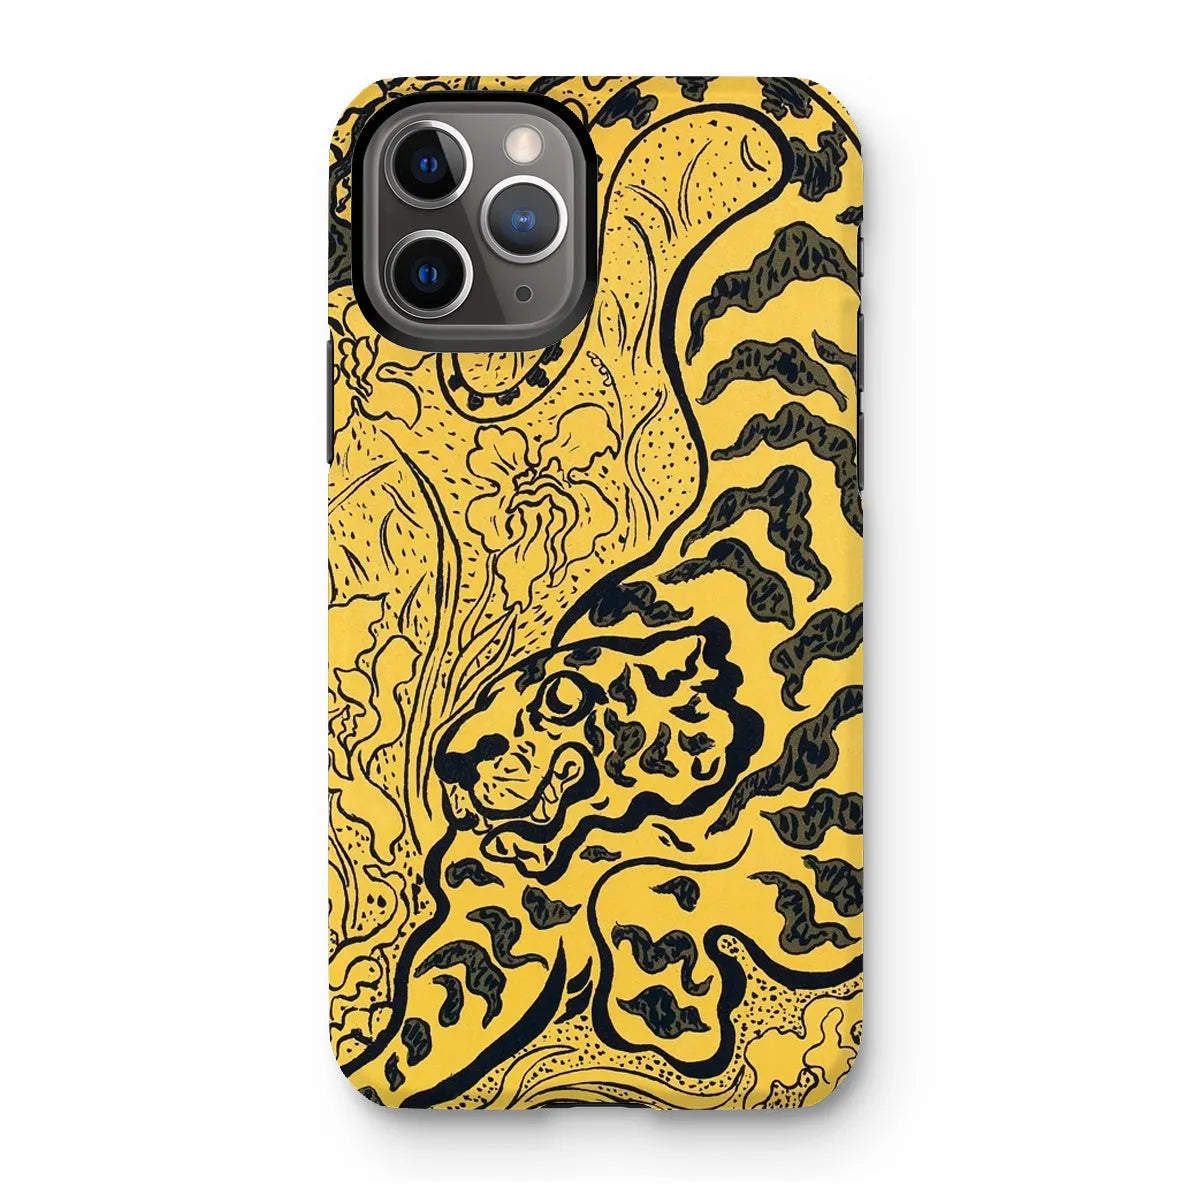 Tiger In The Jungle - Graphic Art Phone Case - Paul Ranson - Iphone 11 Pro / Matte - Mobile Phone Cases - Aesthetic Art